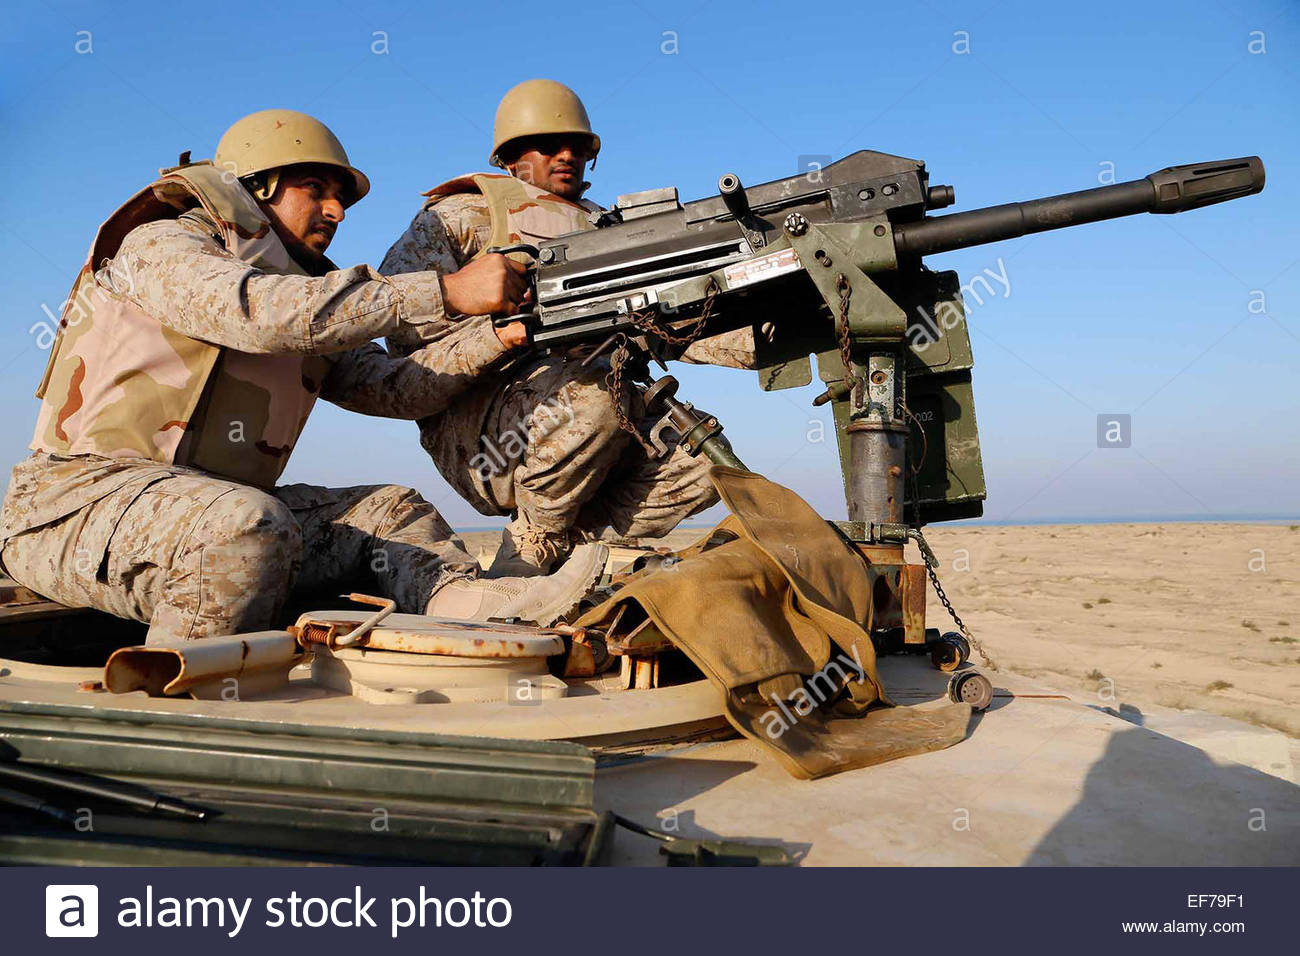 A Saudi Marine fires a Mk19 grenade launcher during a joint machine gun  live fire exercise with U.S. Marines as part of exercise Red Reef December  11, 2014 in Ras Al Khair,